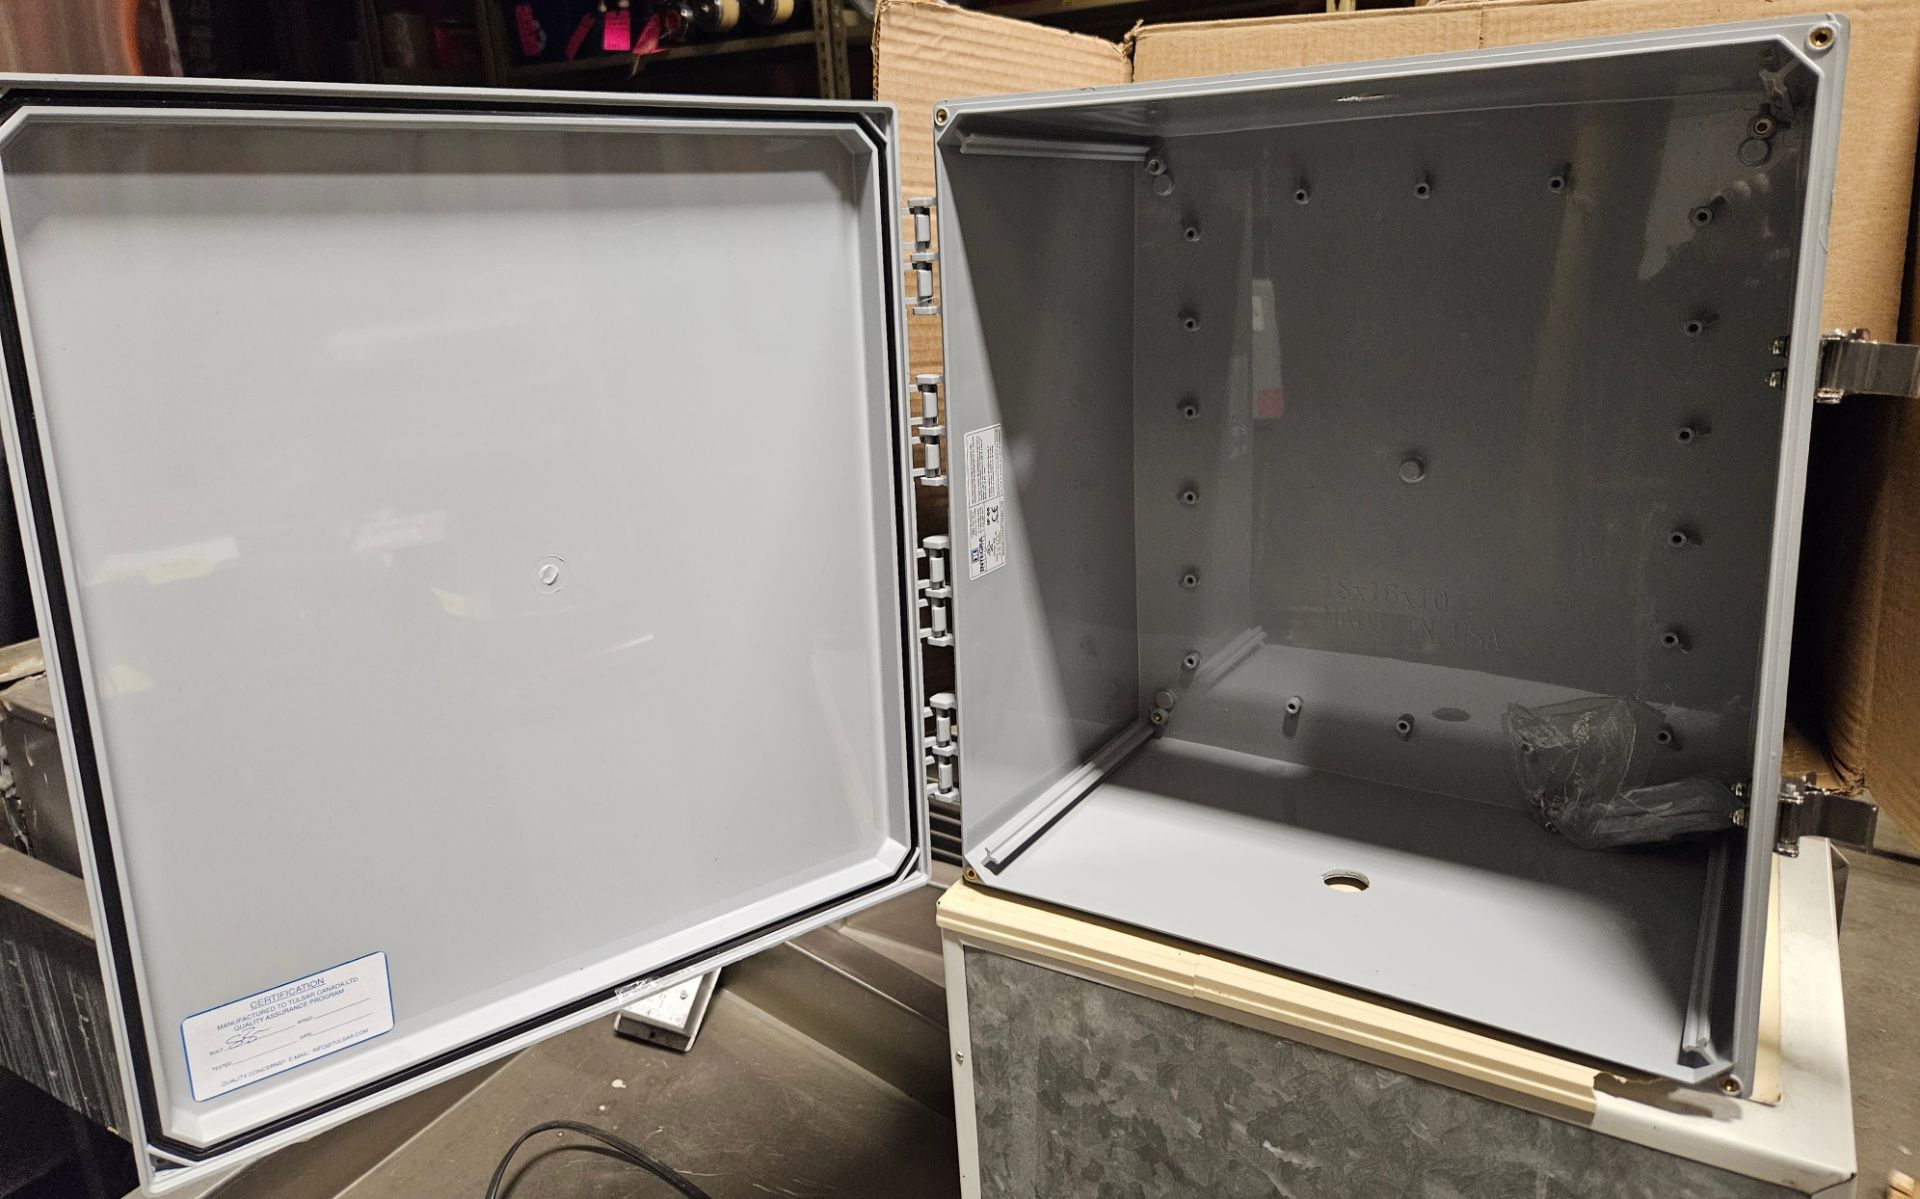 INTEGRA ENCLOSURES, H181610HLL, 8" X 16" X 10" OPAQUE HINGED COVER W/ LOCKING LATCH, MOUNTING FEET - - Image 3 of 6